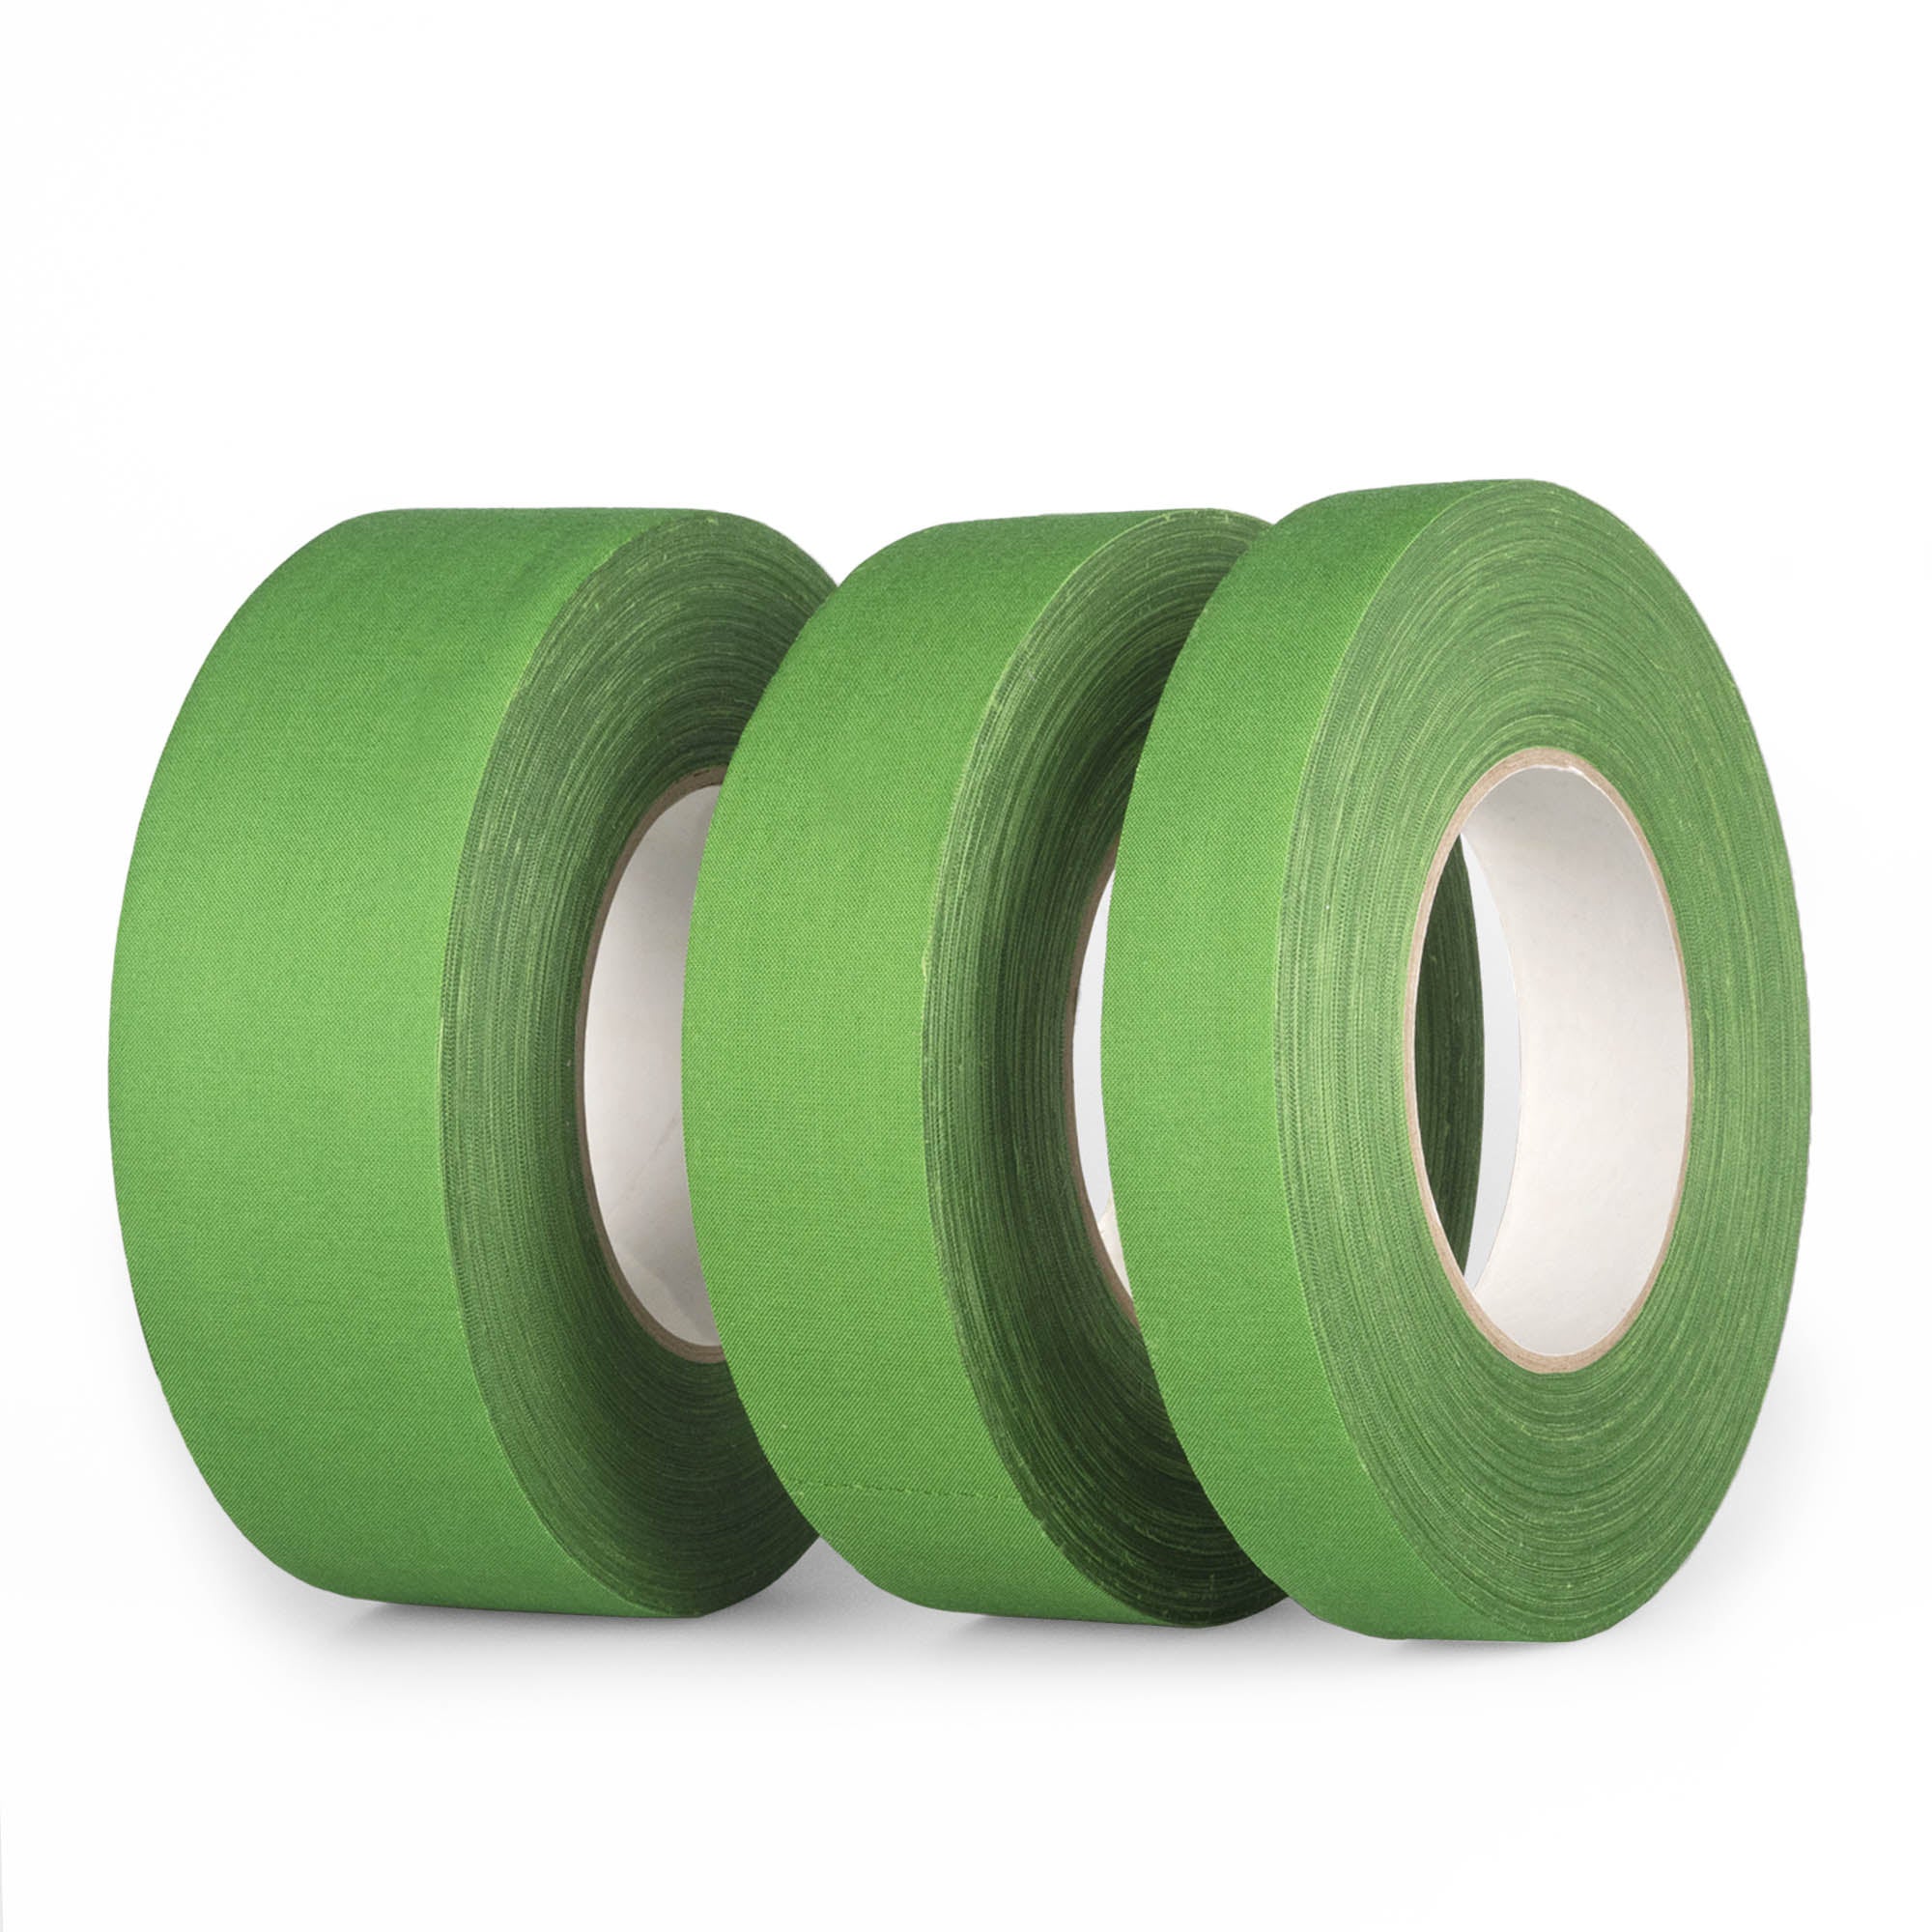 3 sizes of green tape